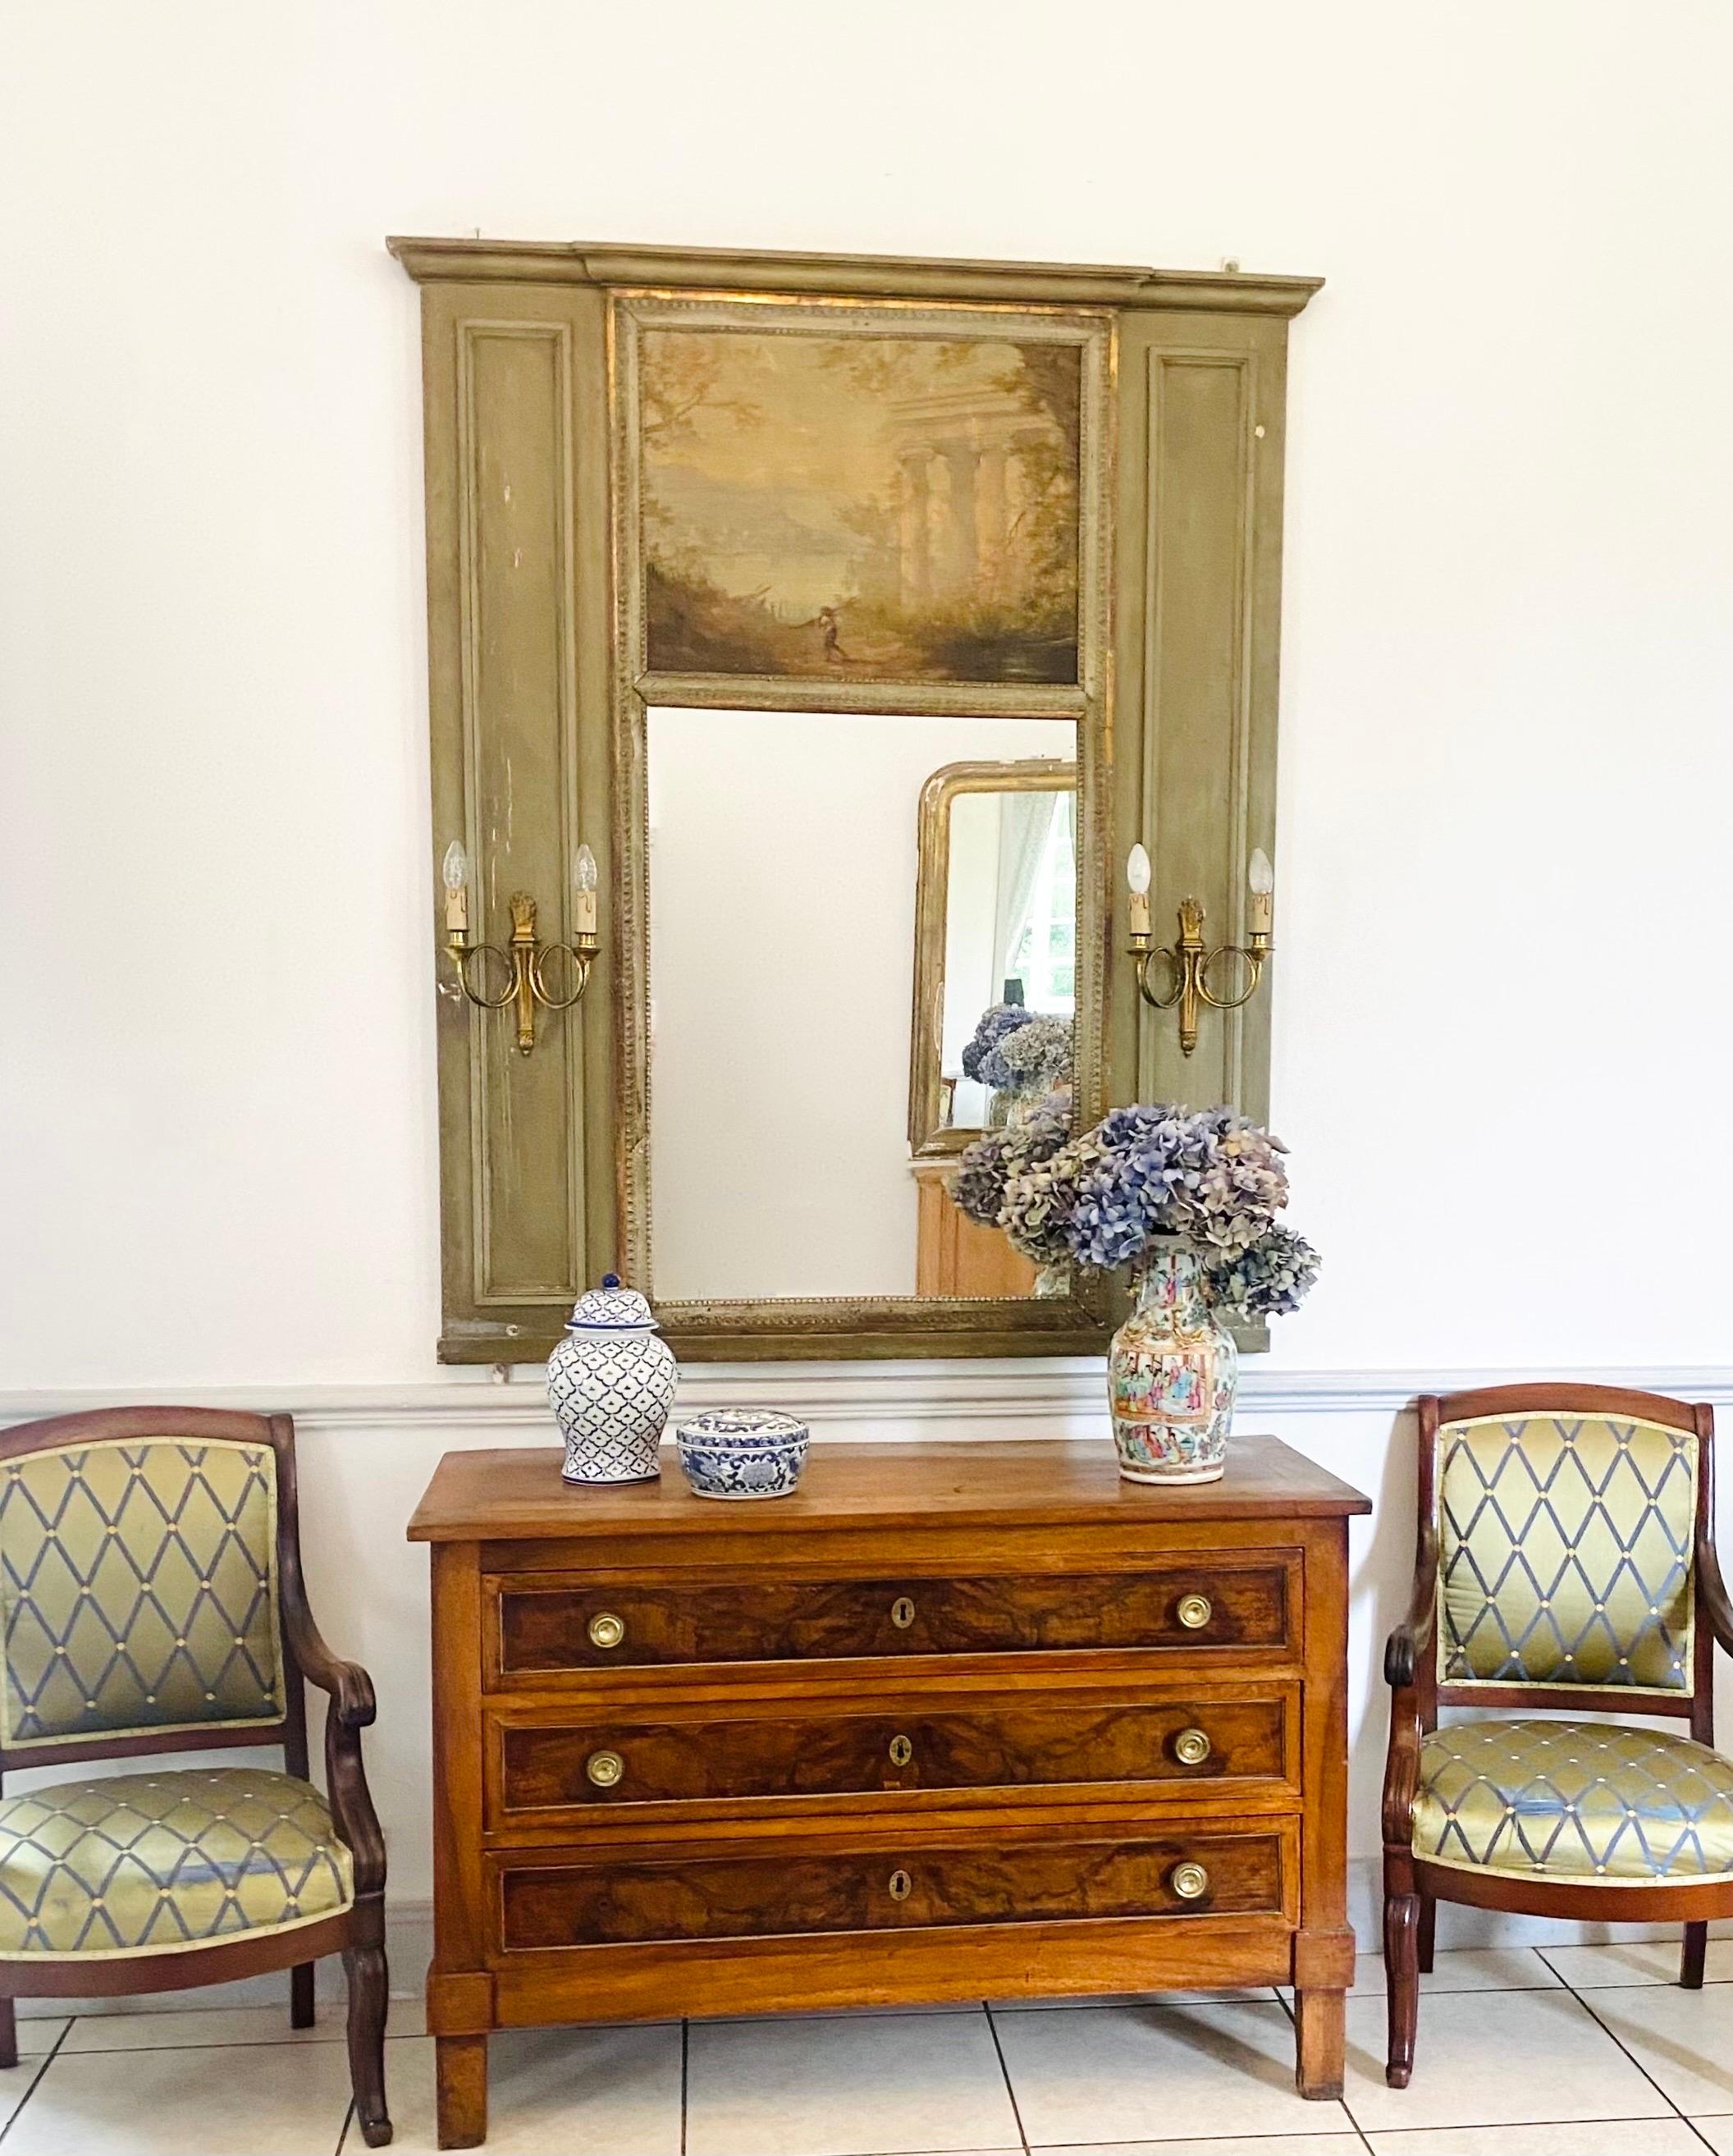 Magnificent Large trumeau mirror Dating from the 18th century Louis XVI period.
The trumeau is in Rechampi green and gilded lacquered wood.
It consists of an original mirror in the lower part and a very pretty oil on canvas in the upper part. On